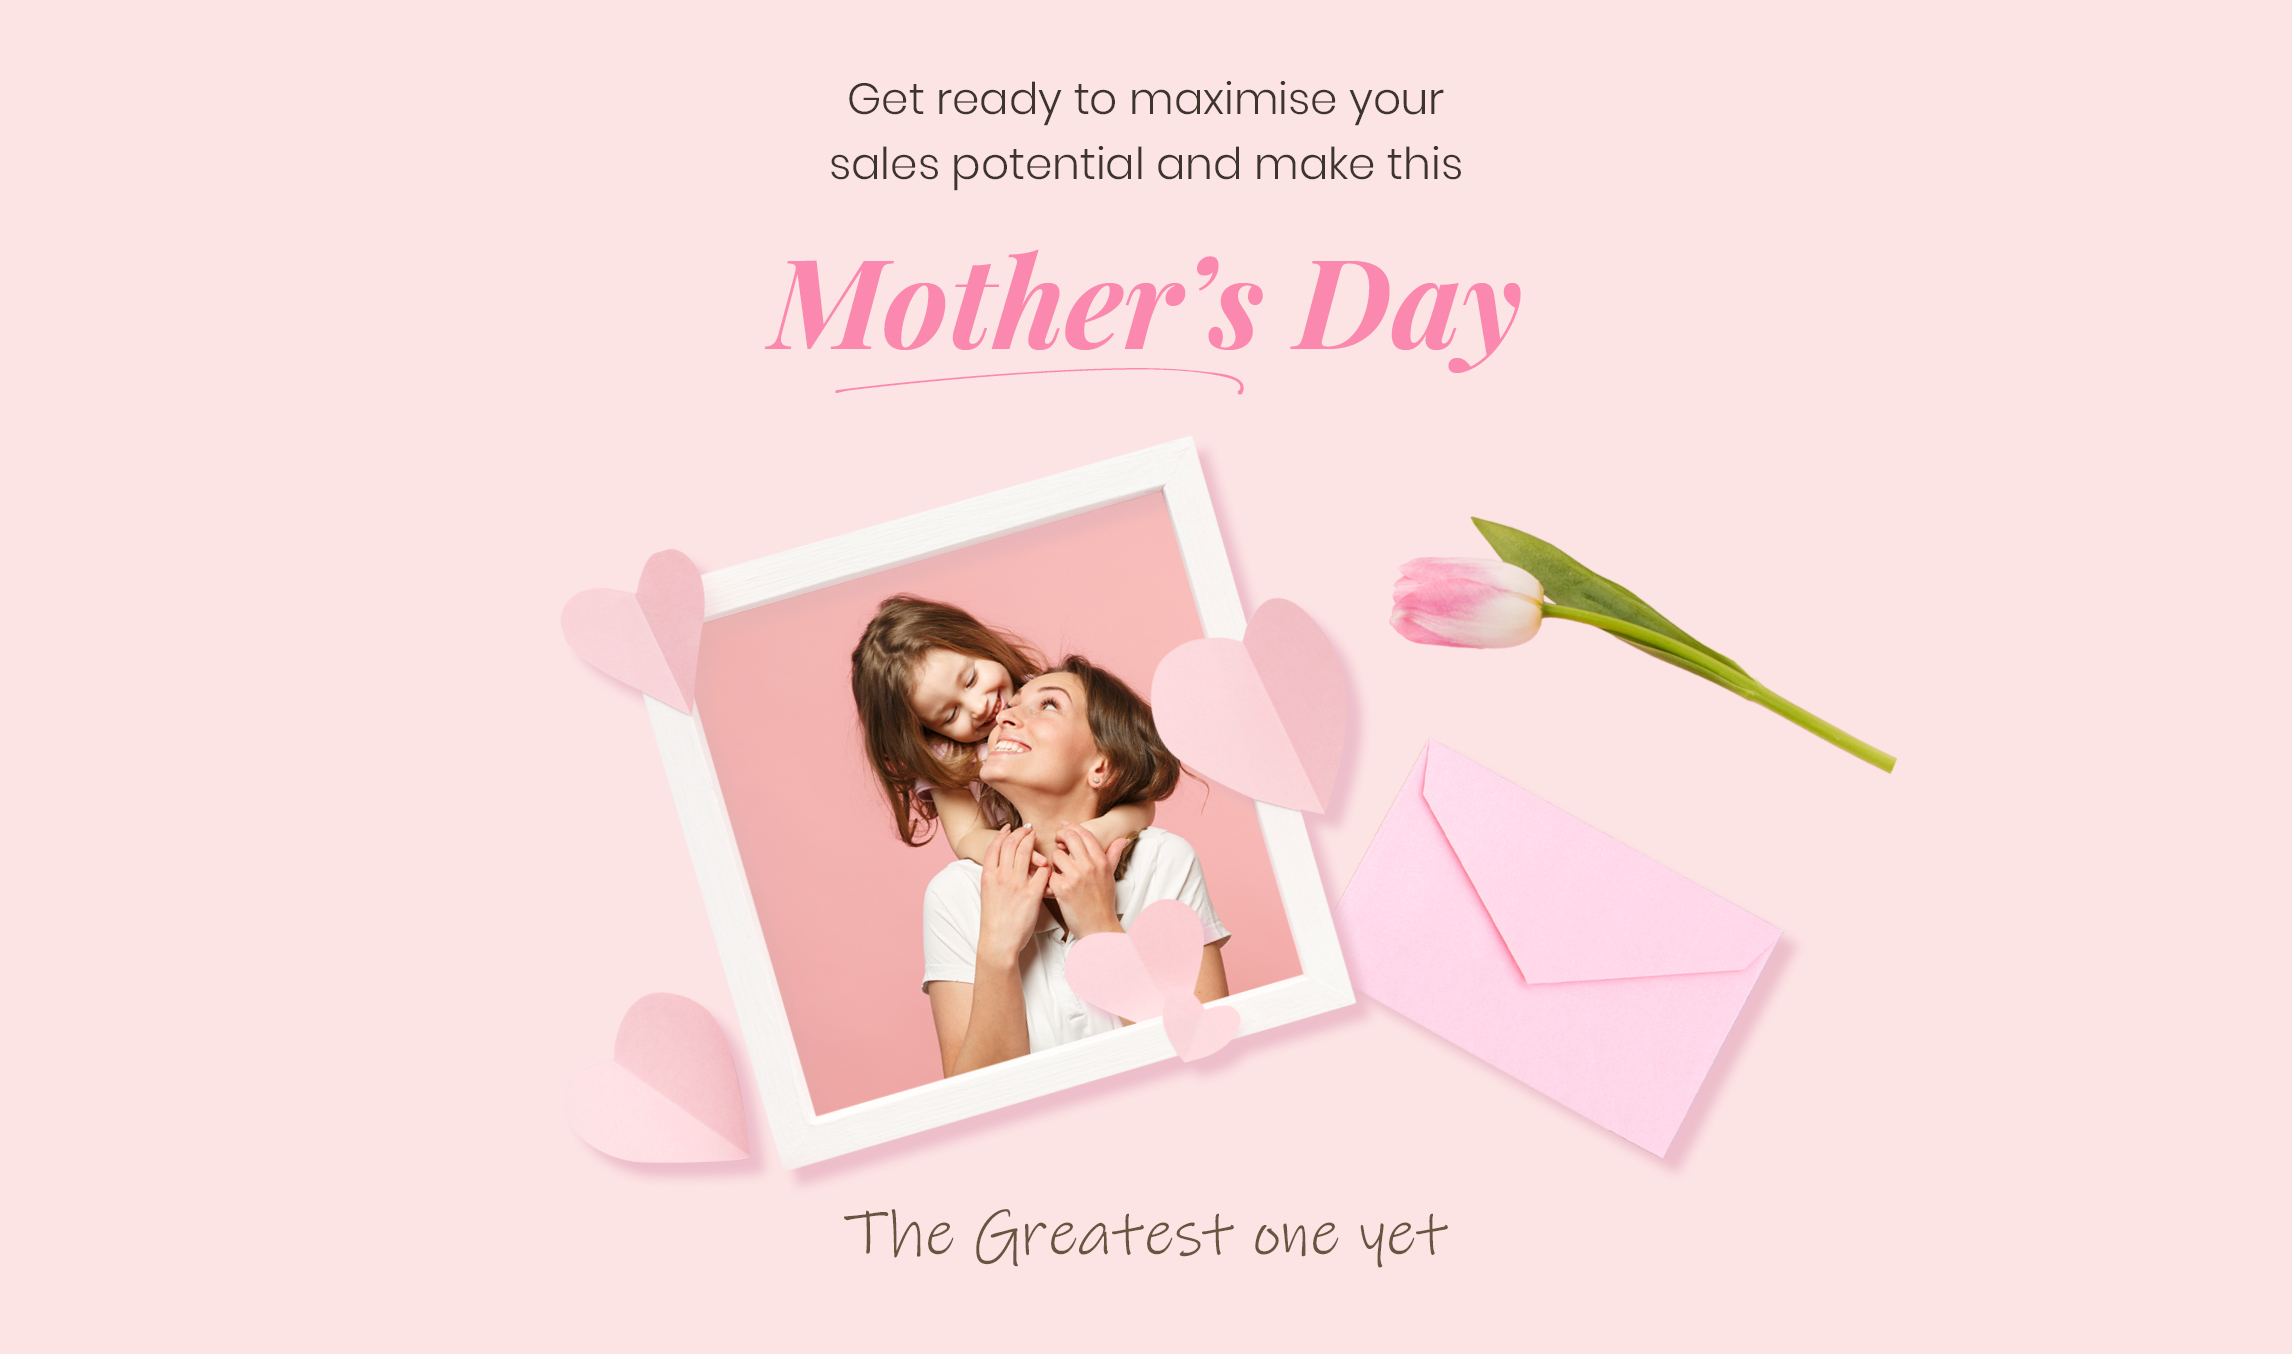 Maximise your sales potential this Mother’s Day.